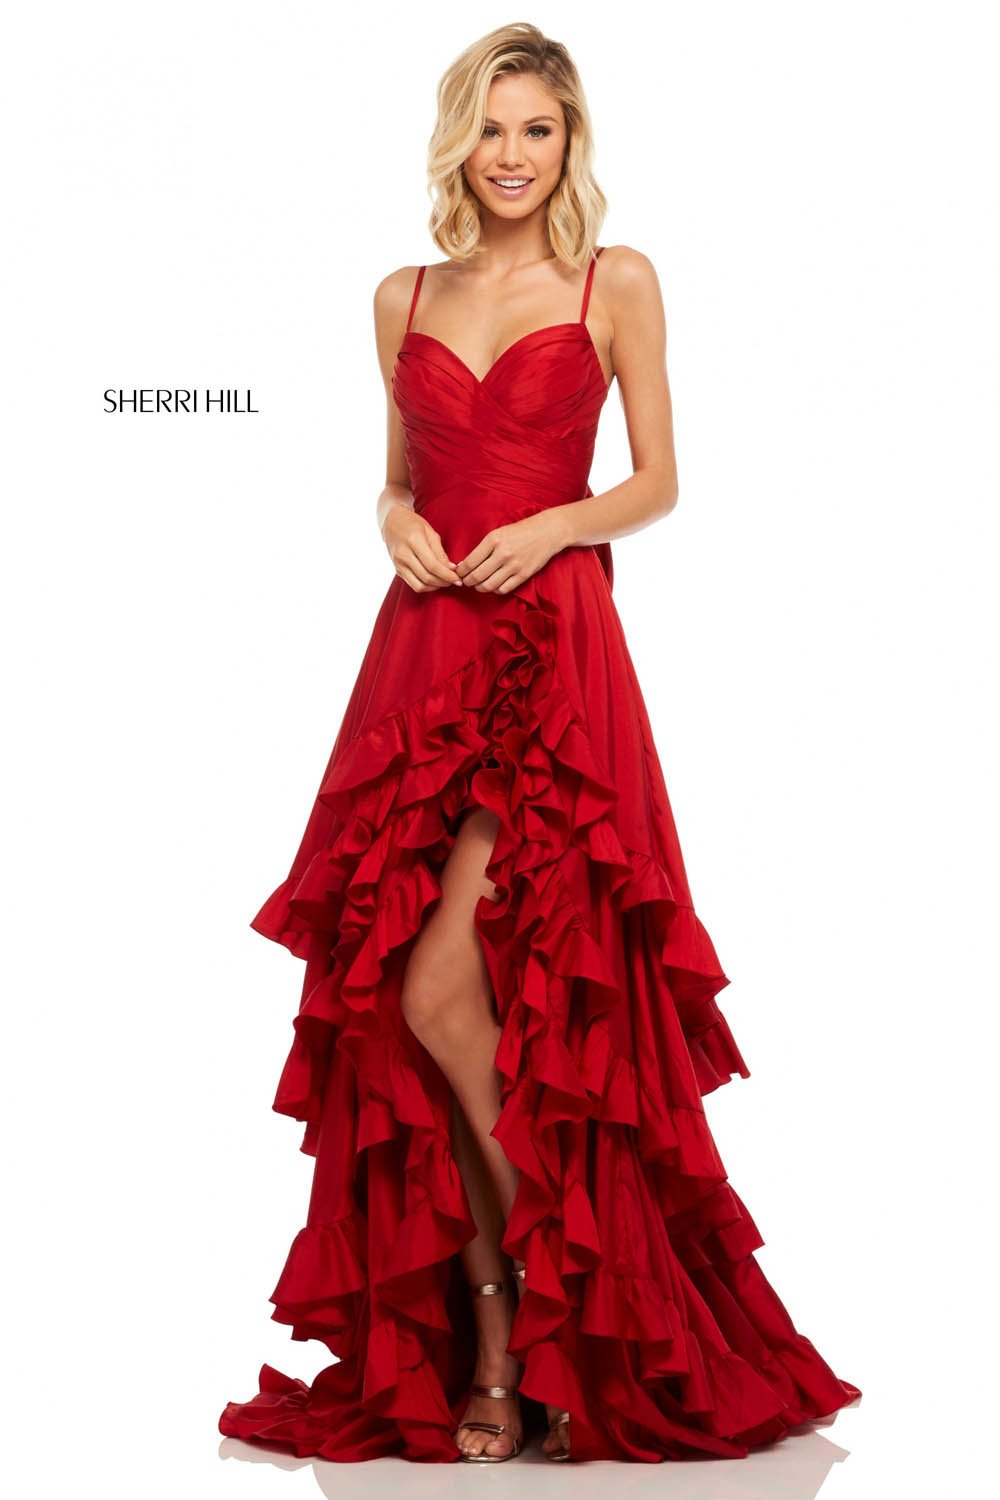 Sherri Hill 52834 dress images in these colors: Red, Pink, Black, Ivory, Turquoise, Navy, Light Blue, Yellow.